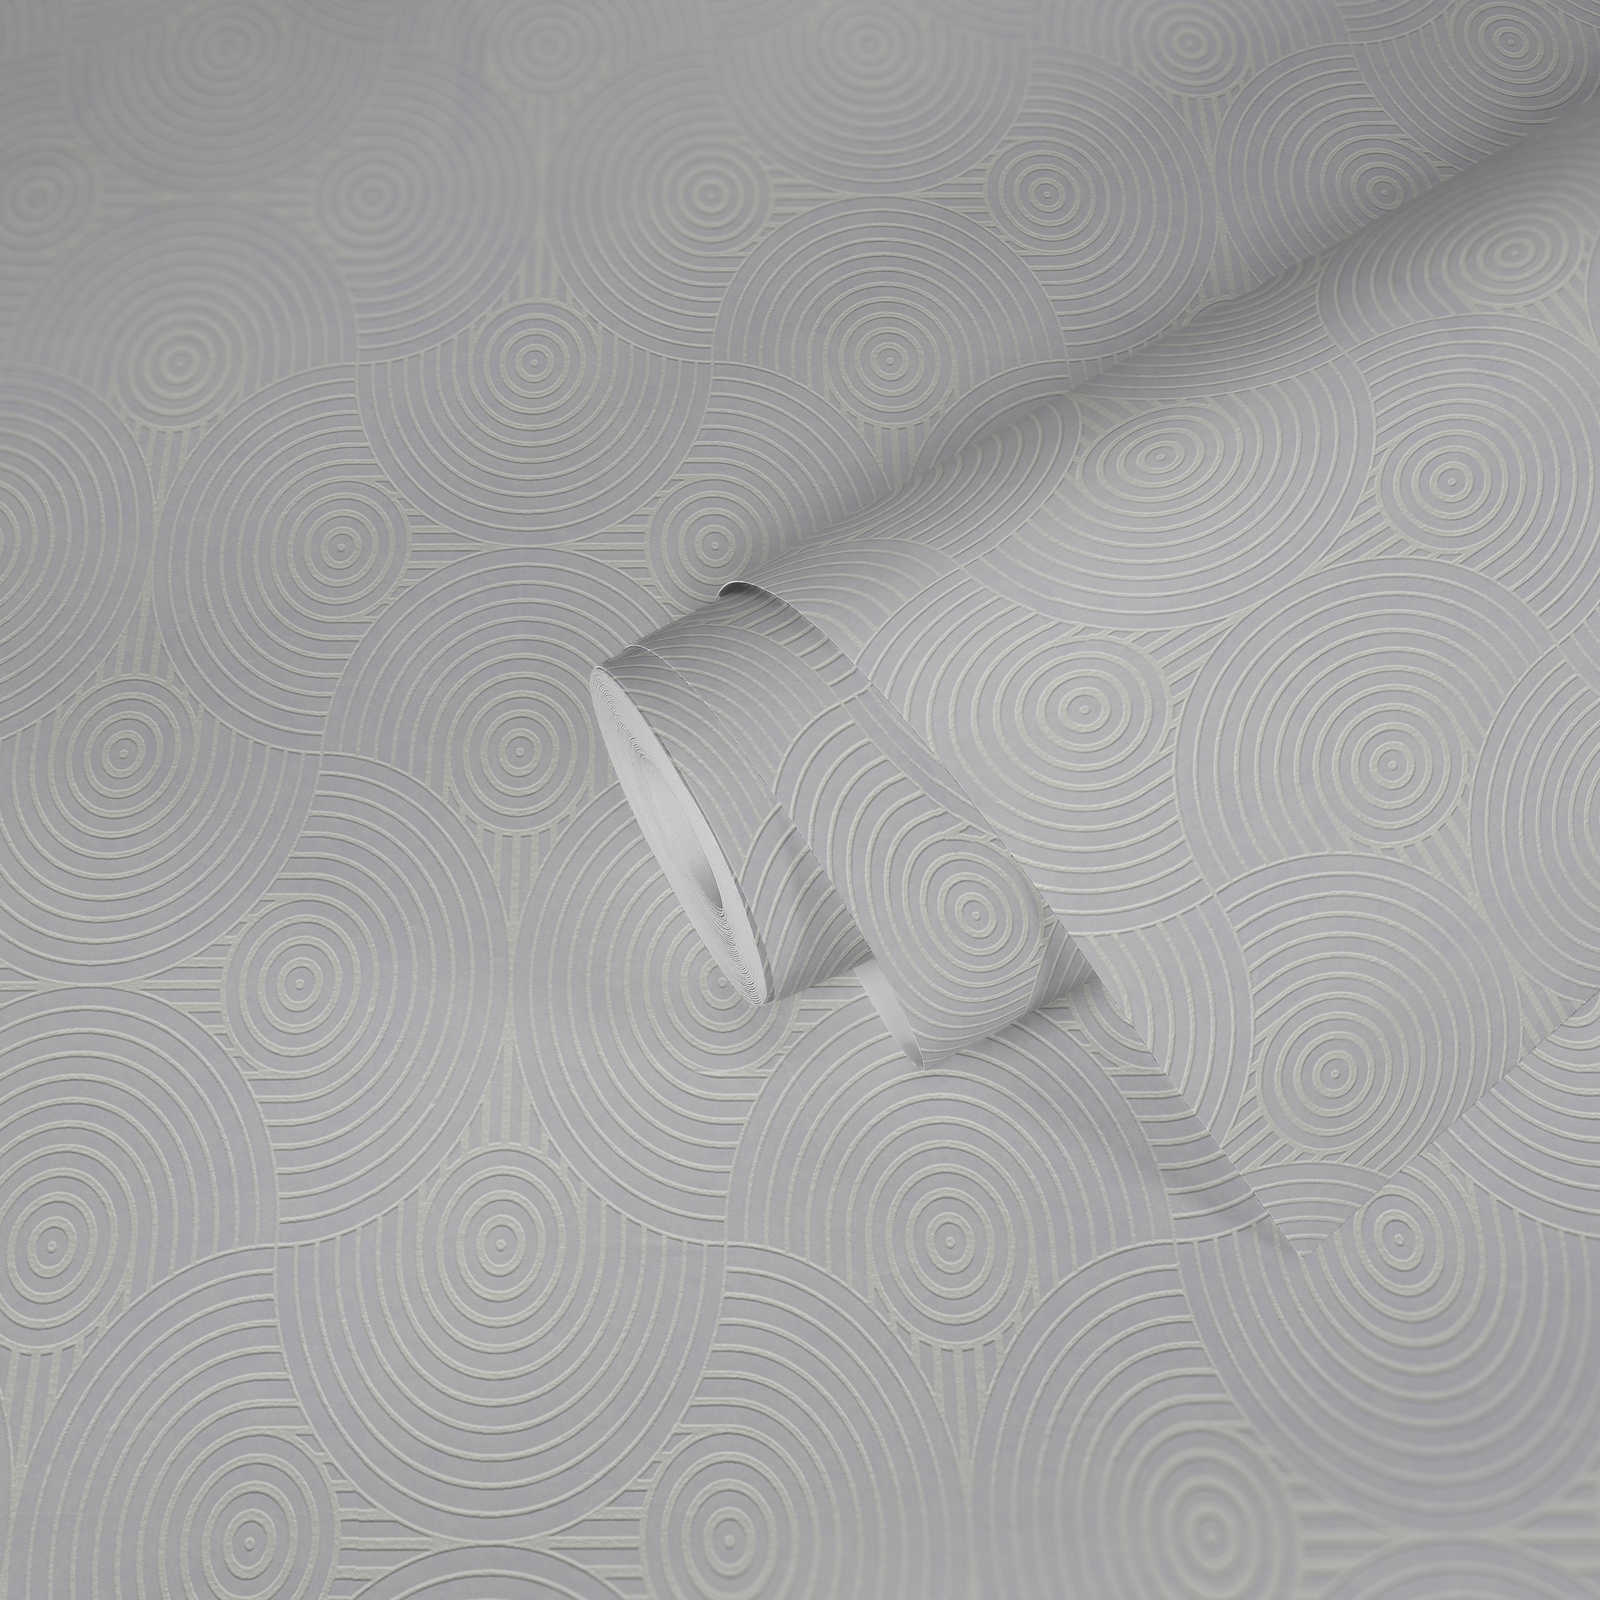             Paintable wallpaper with semi-circle pattern of lines - Paintable
        